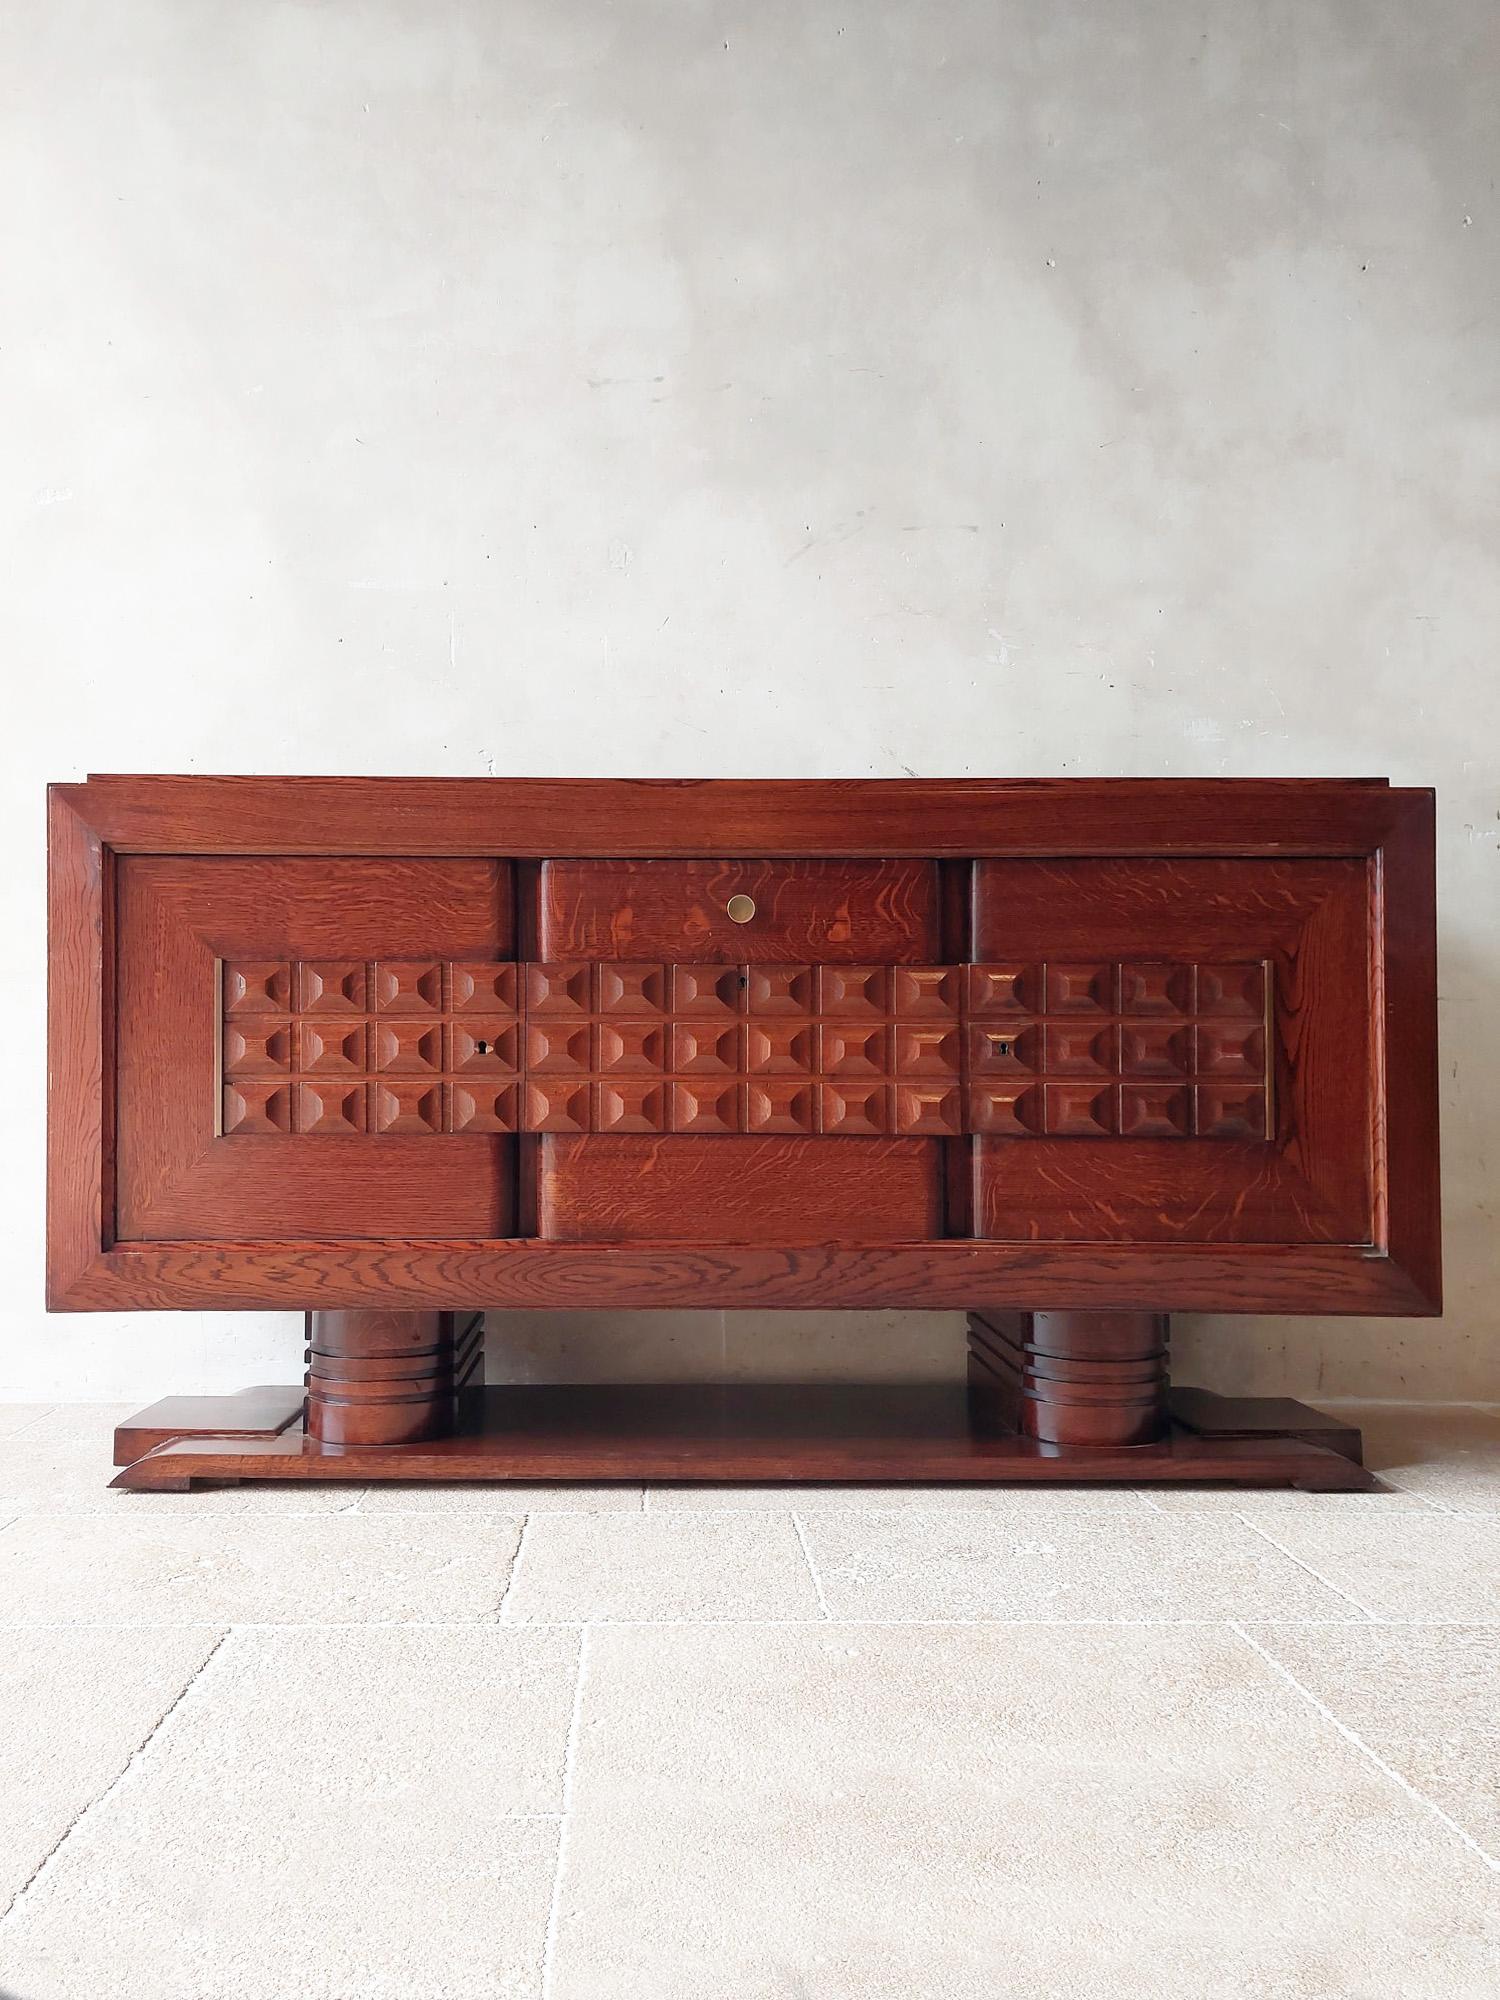 Midcentury brown oak sideboard by Charles Dudouyt, 1940s. Beautiful sideboard in pre-Brutalist Art Deco style decorated with typical geometric shapes of Dudouyt. The base gives this sideboard an extra sturdy character.

Dimensions: H 101 x W 200 x